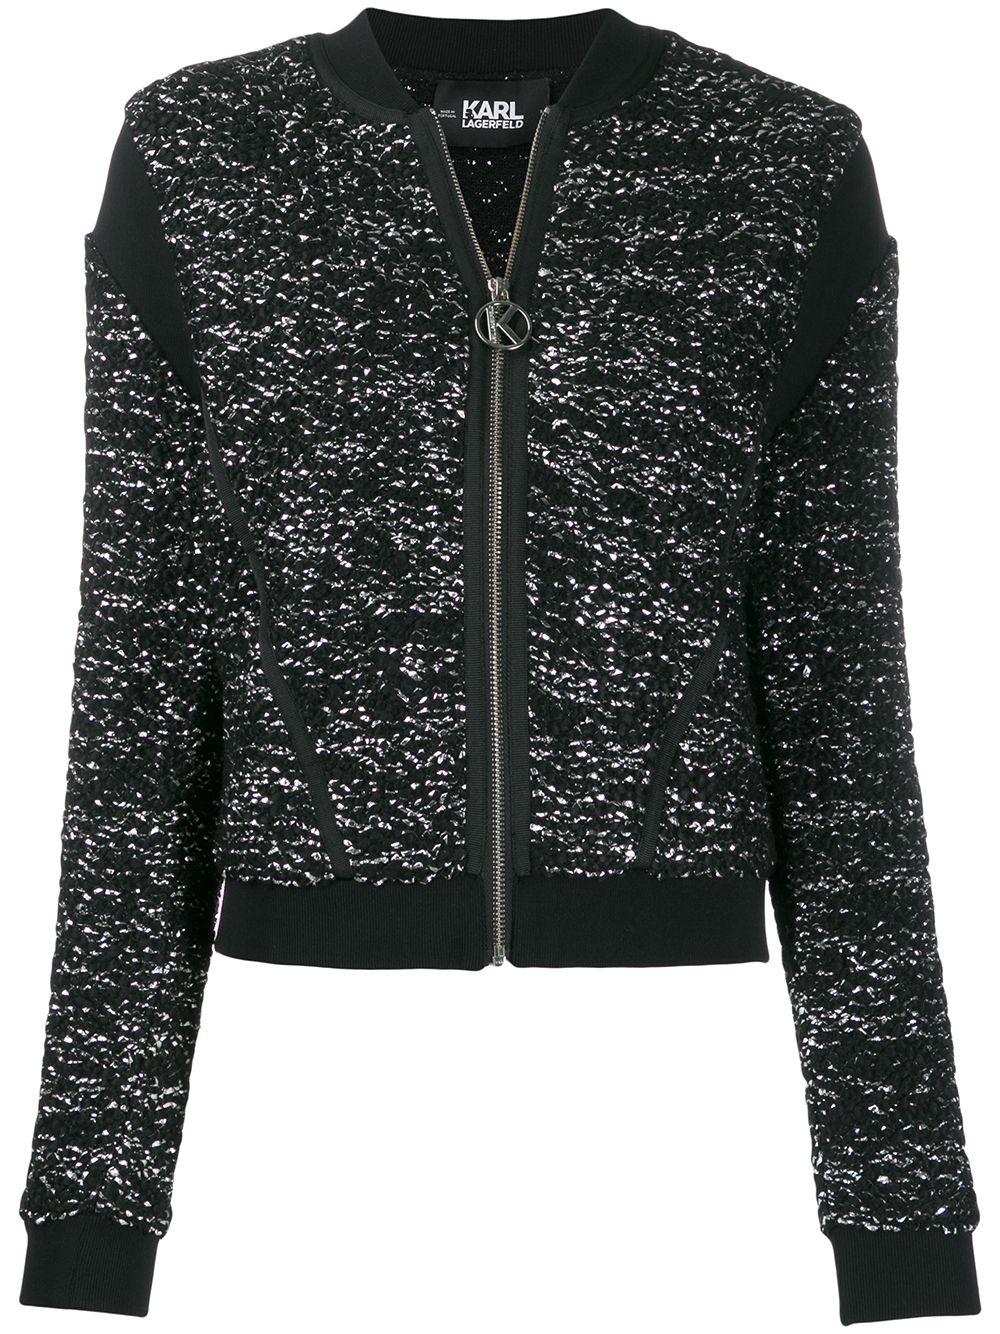 Karl Lagerfeld Synthetic Boucle Bomber Jacket in Black - Lyst